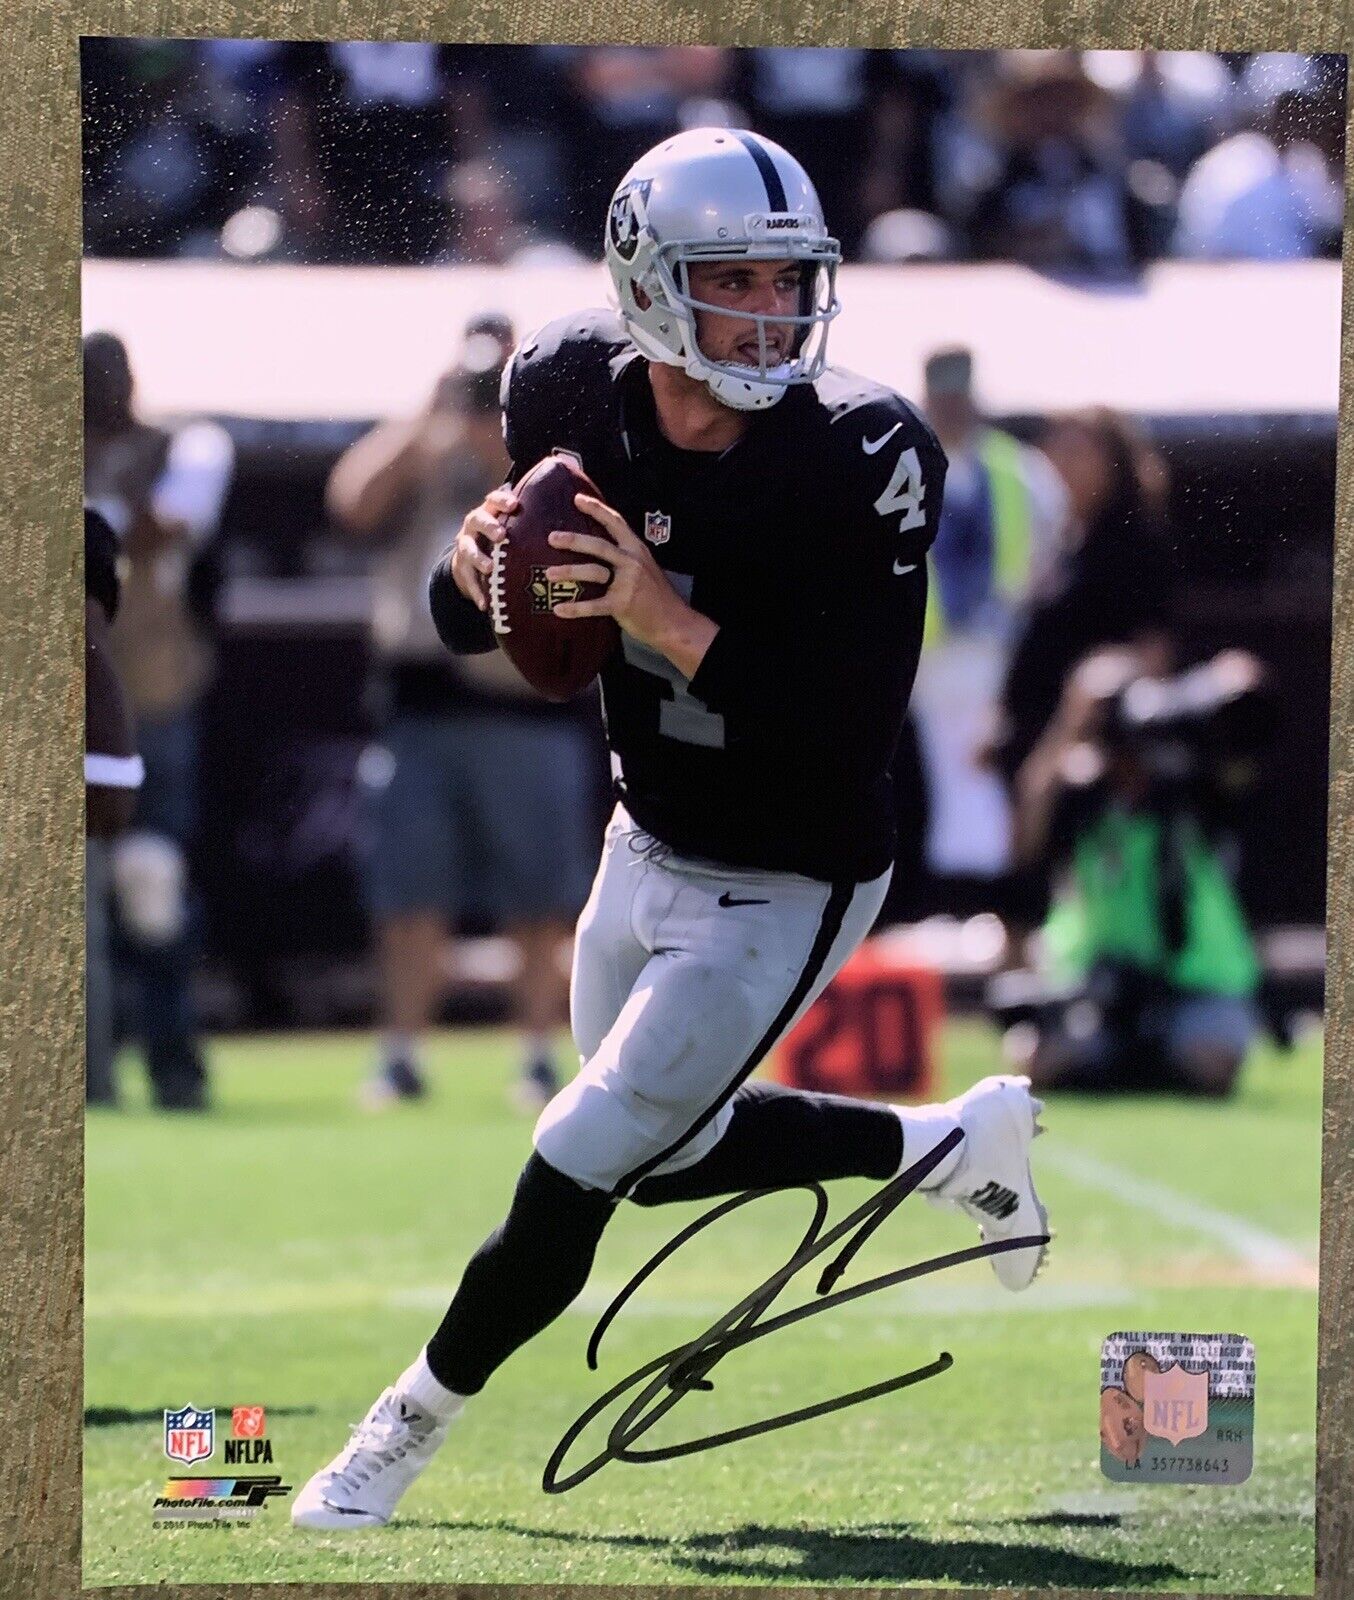 DEREK CARR SIGNED AUTOGRAPHED AUTO 8x10 Fresno Bull Dogs Photo Poster painting OAKLAND RAIDERS